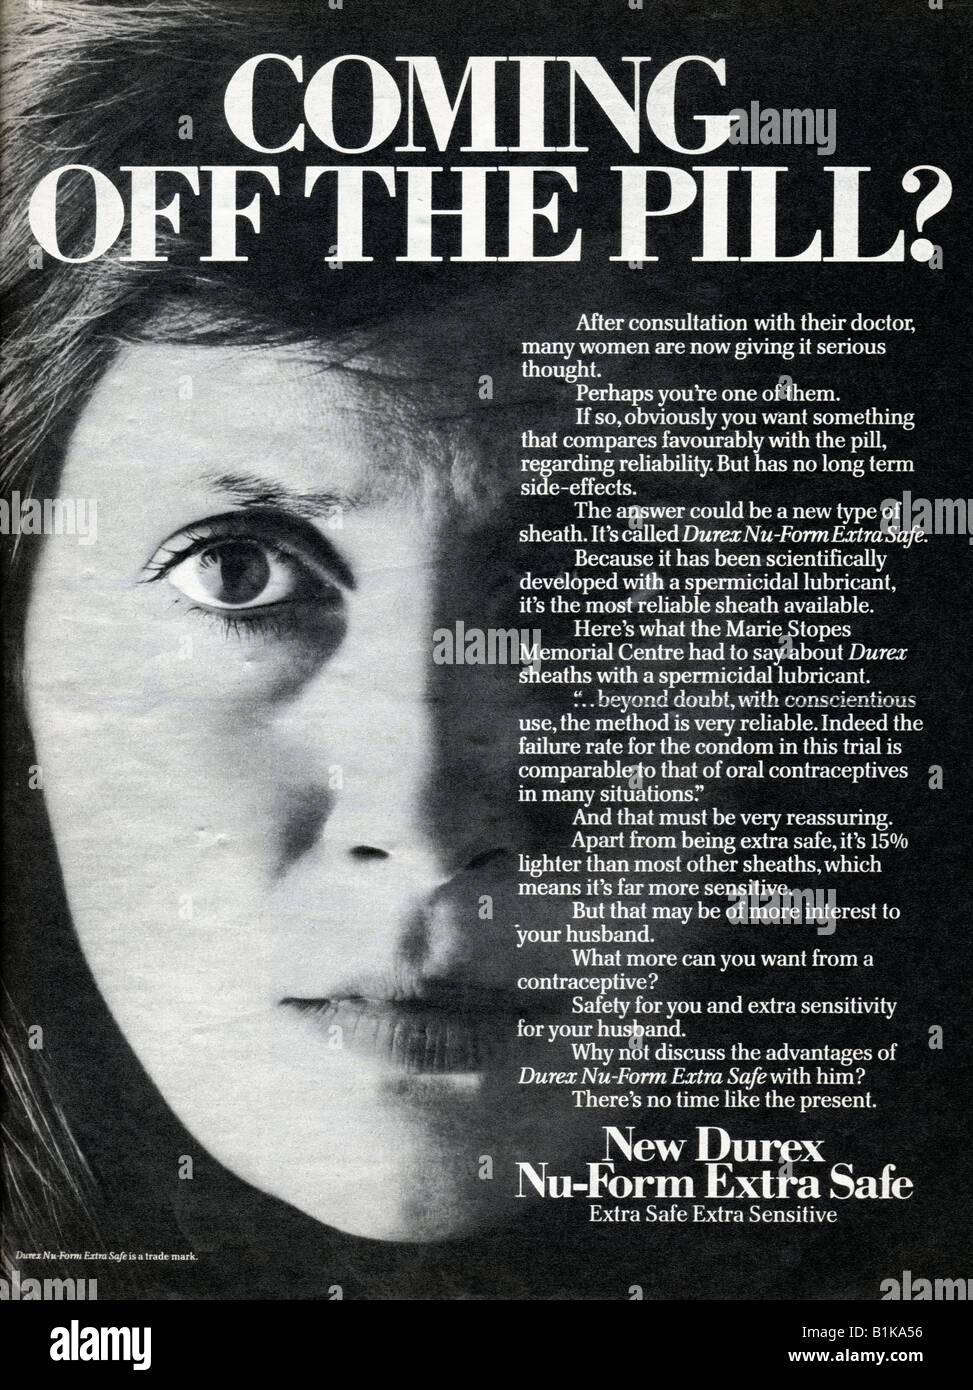 1978 magazine advertisement for Durex contraceptive sheaths condoms highlighting worries about the Pill FOR EDITORIAL USE ONLY Stock Photo